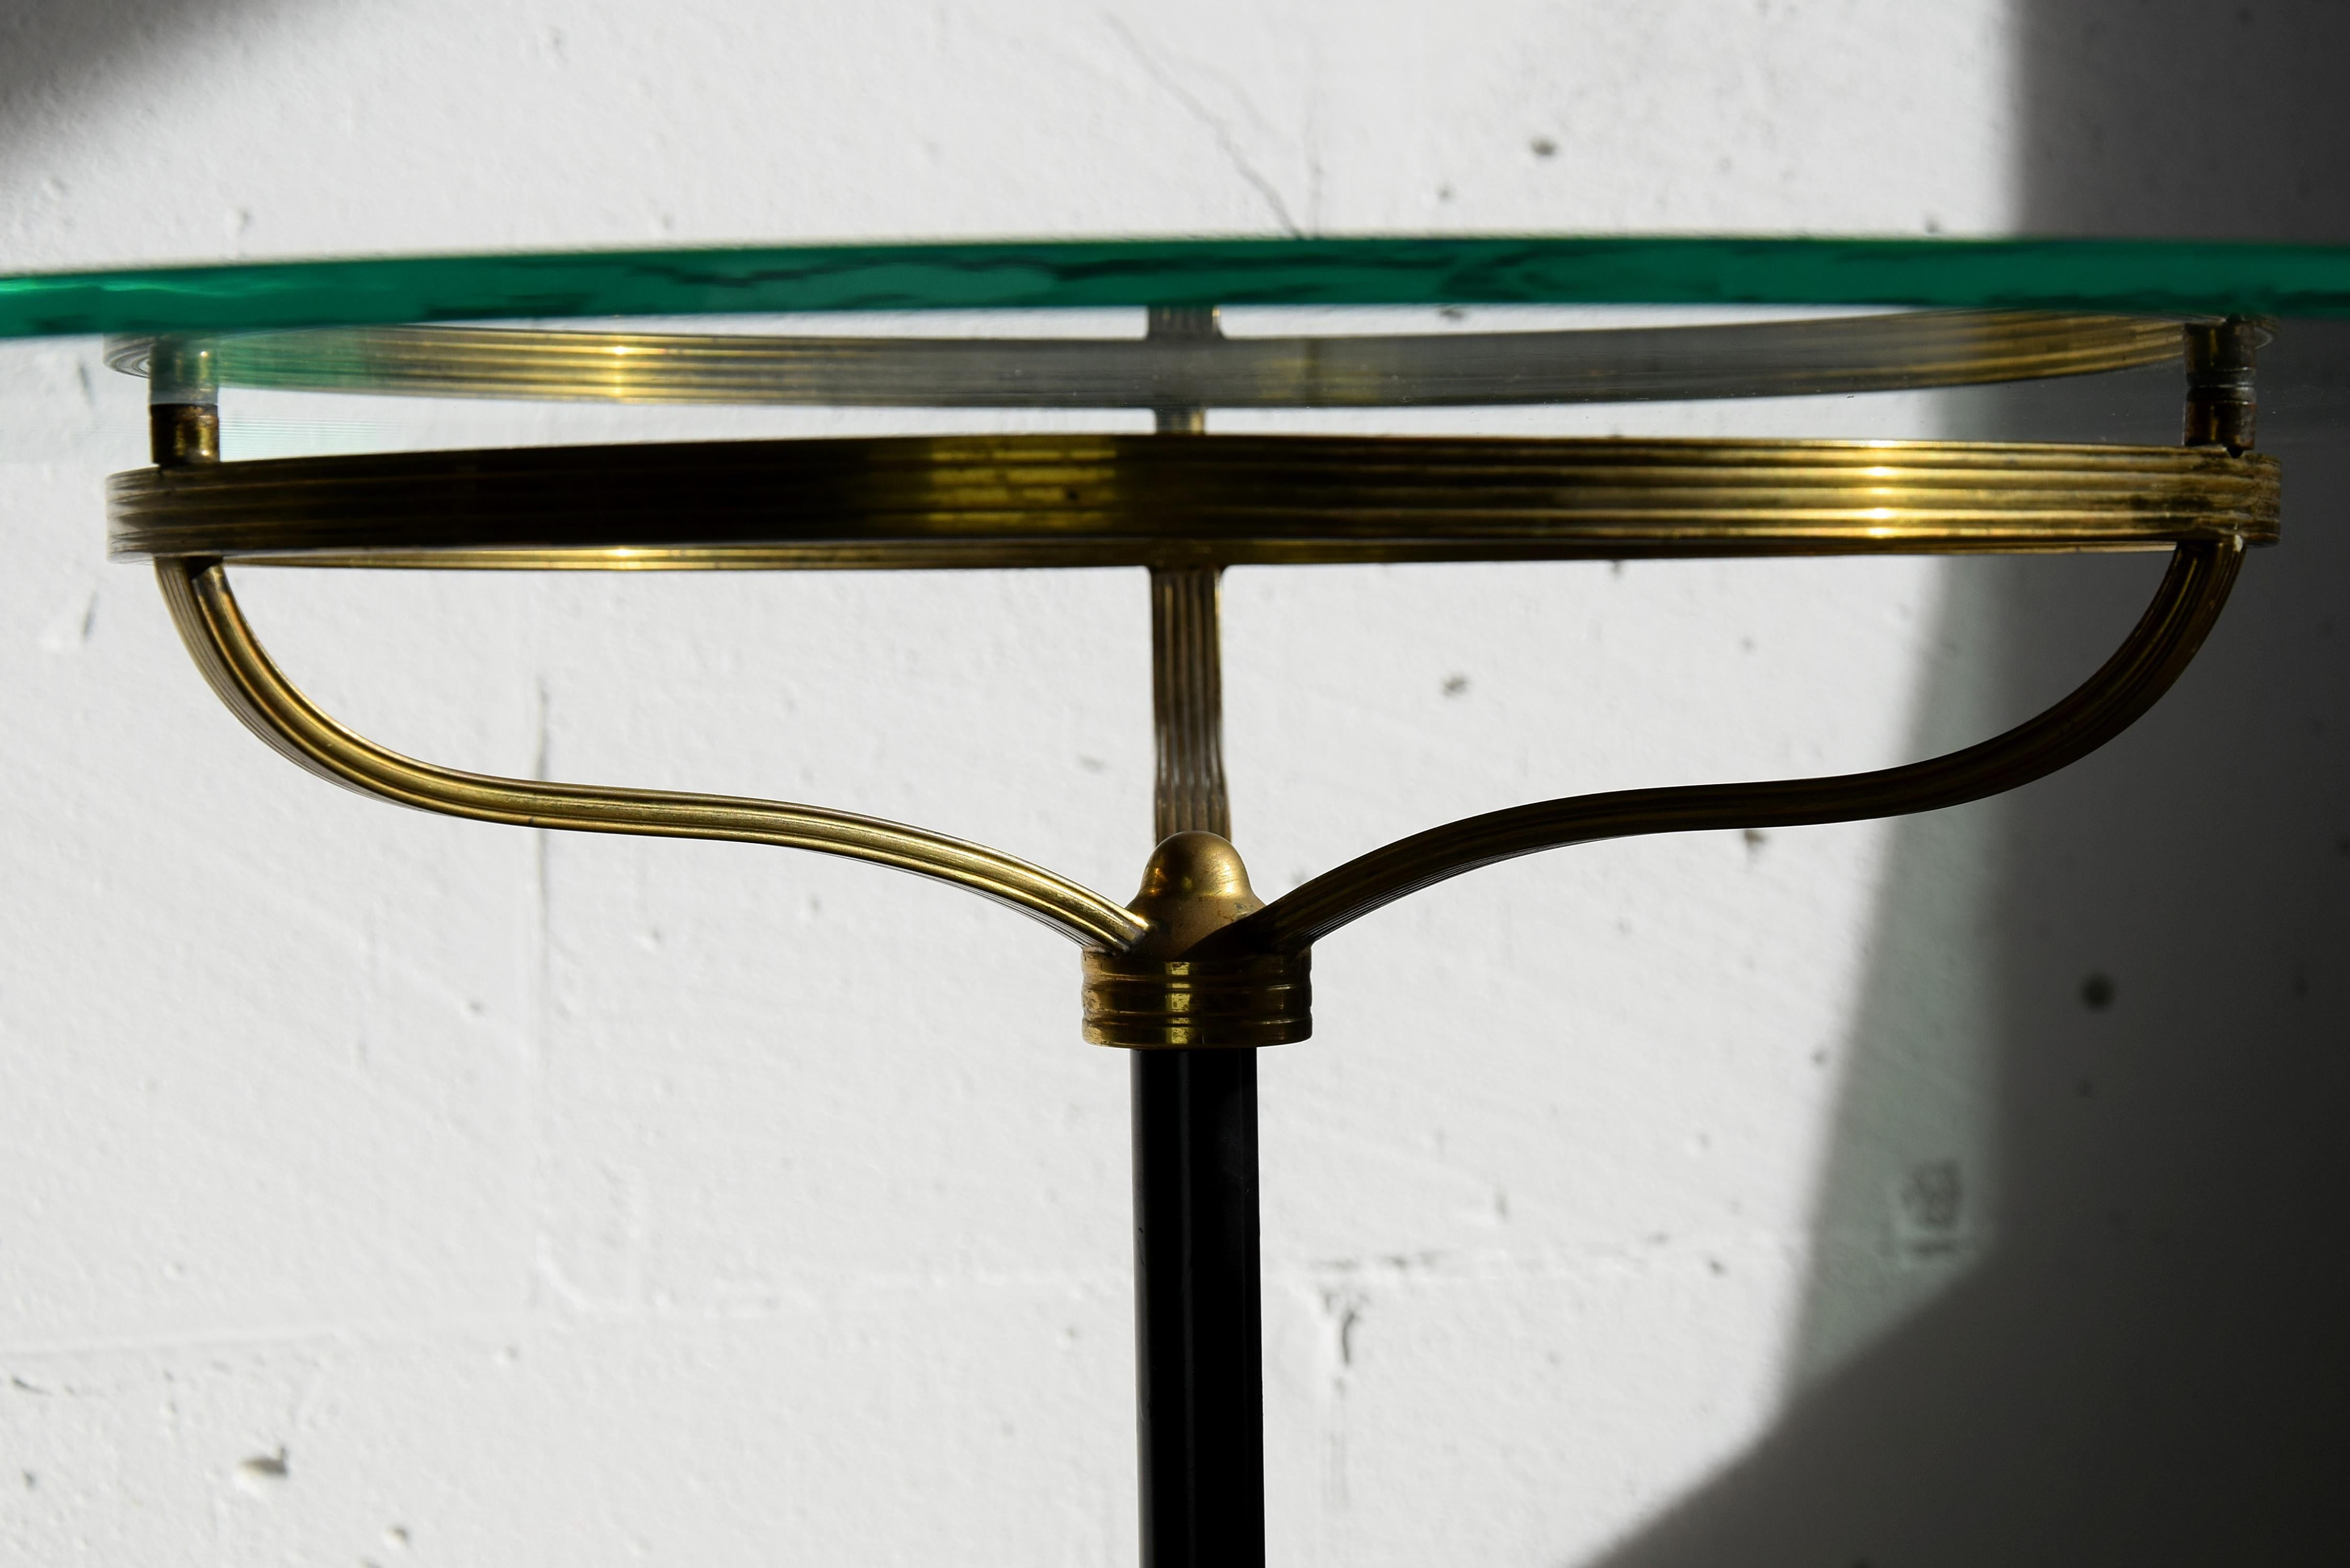 Stylish and sophisticated Italian brass and glass side table produced in the 1960's. 
This elegant tabel will be shipped disassembled. To put it back together takes 5 minutes.
The table wil be shipped insured overseas in a custom made wooden crate.